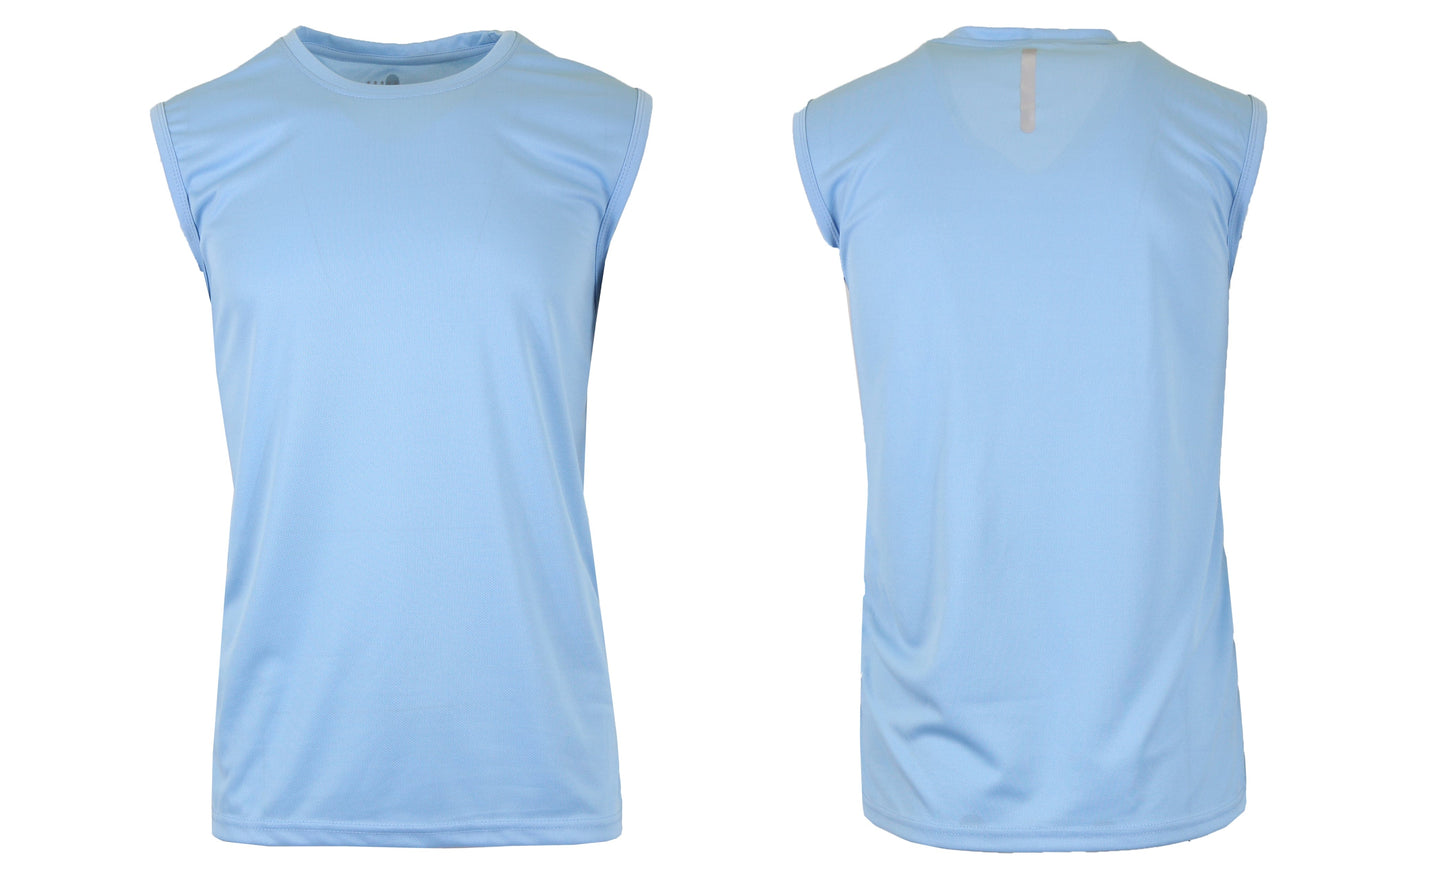 Men's Moisture Wicking Active Performance Muscle Tank Tee - GalaxybyHarvic